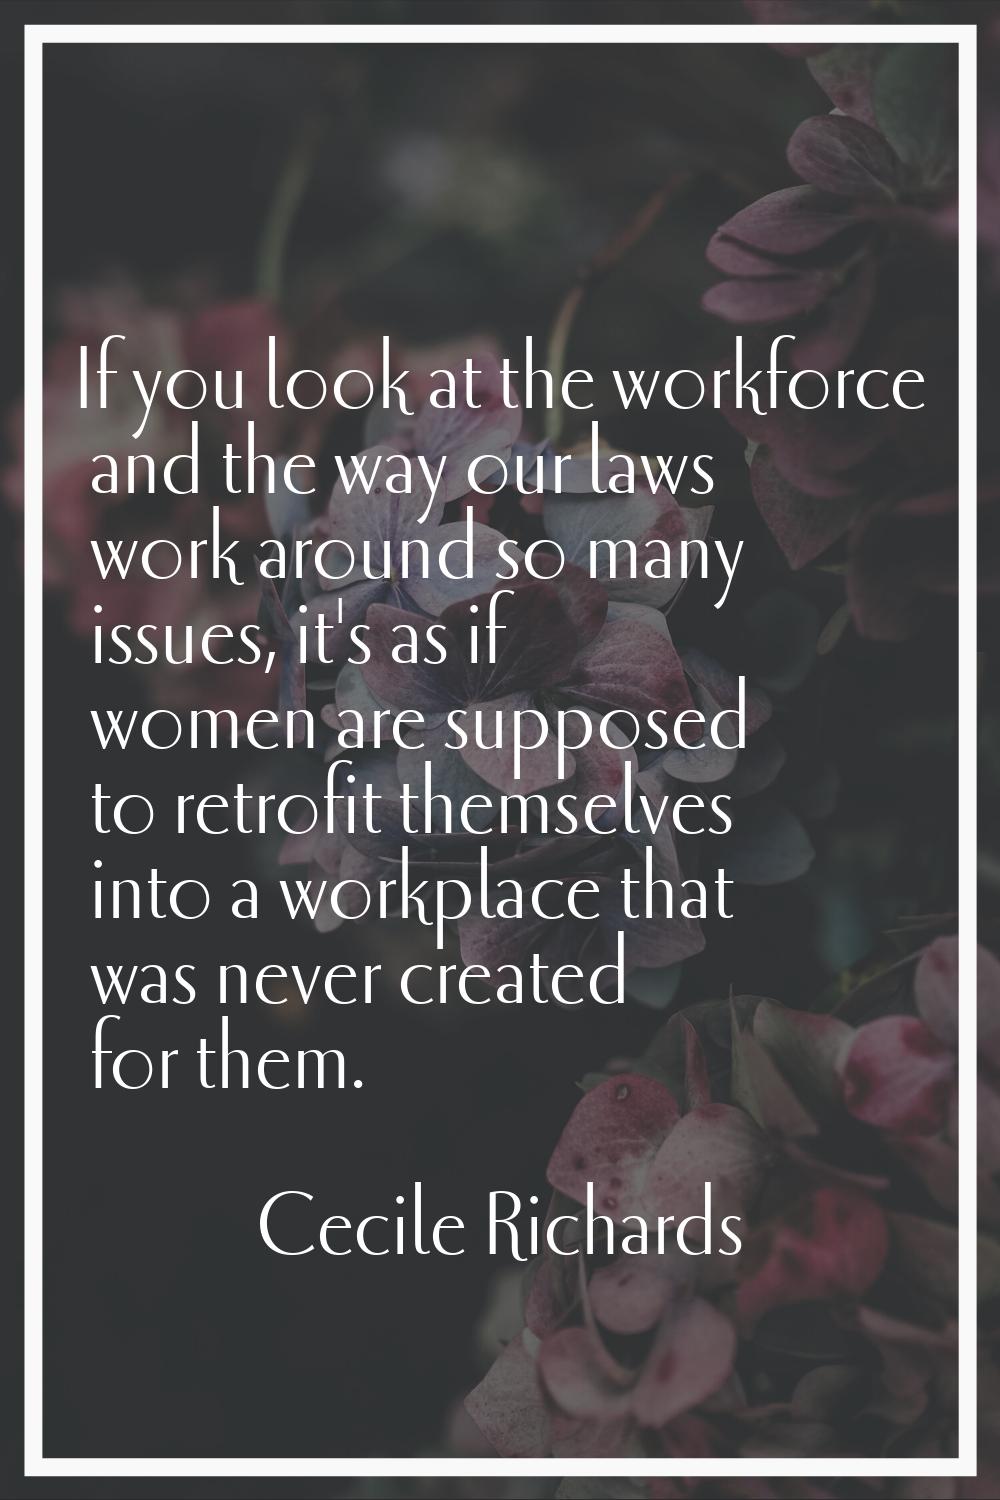 If you look at the workforce and the way our laws work around so many issues, it's as if women are 